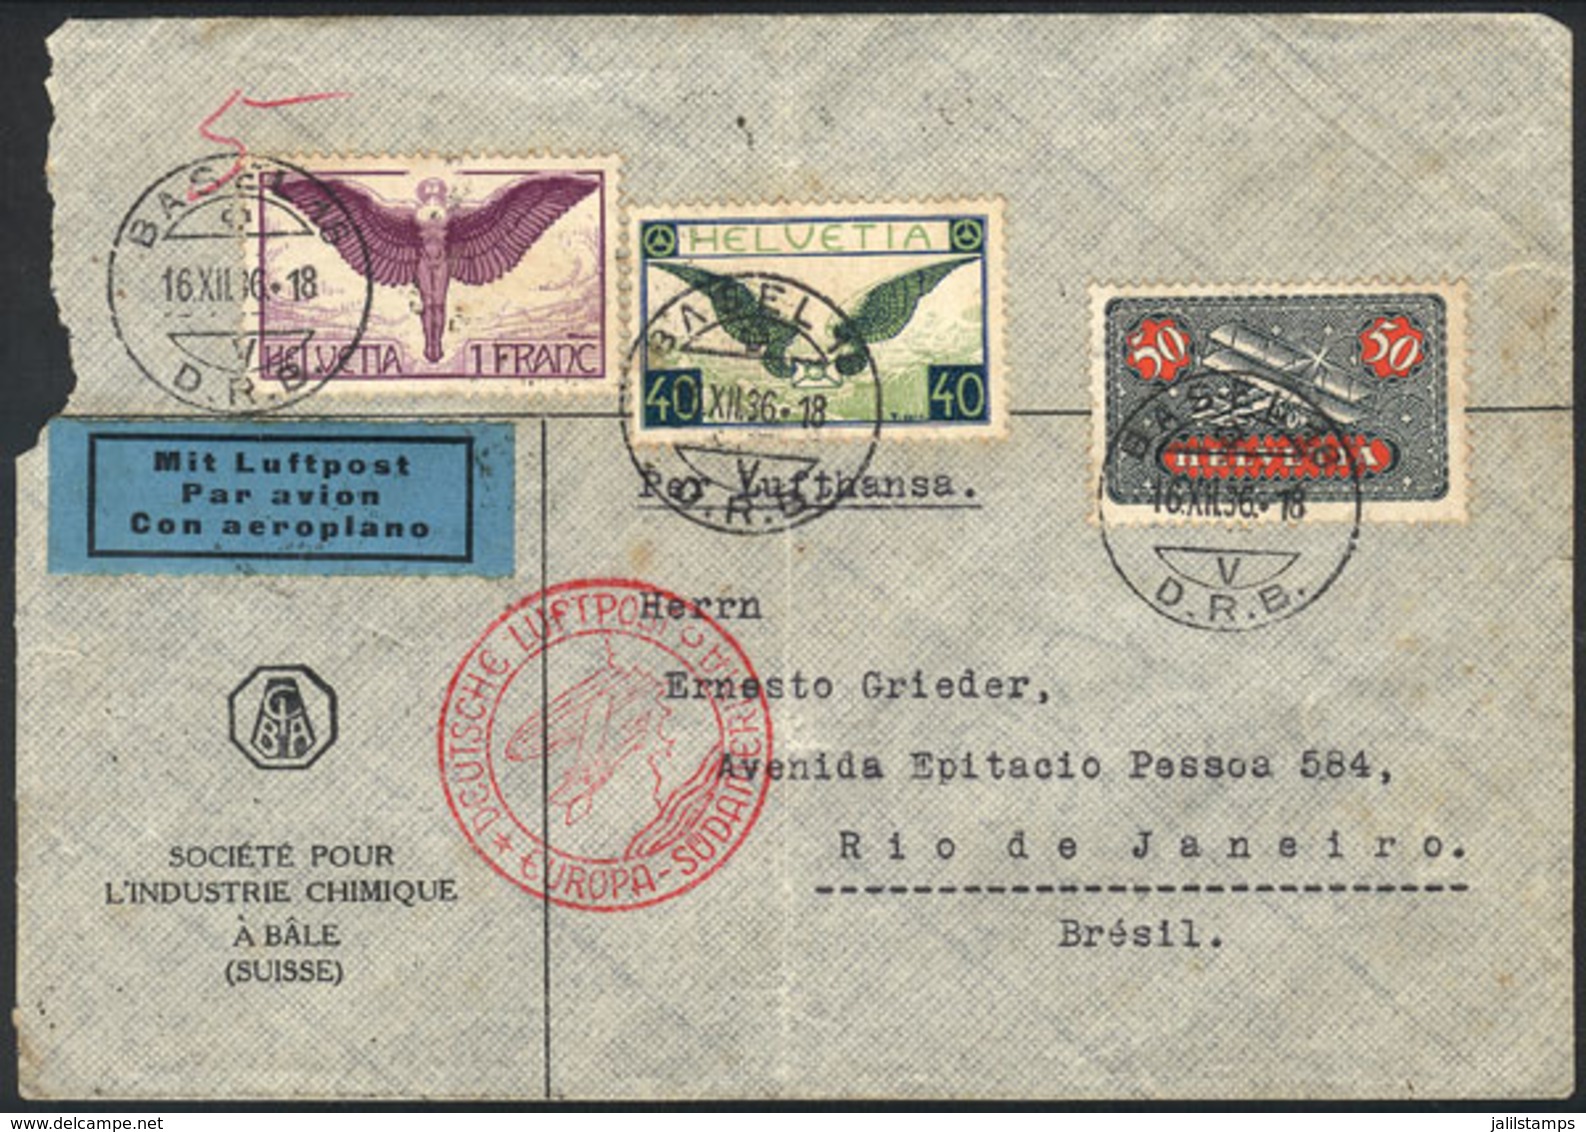 SWITZERLAND: Airmail Cover Sent From Basel To Rio De Janeiro On 16/DE/1936 By Germany DLH Franked With 1.90Fr., Interest - ...-1845 Voorlopers